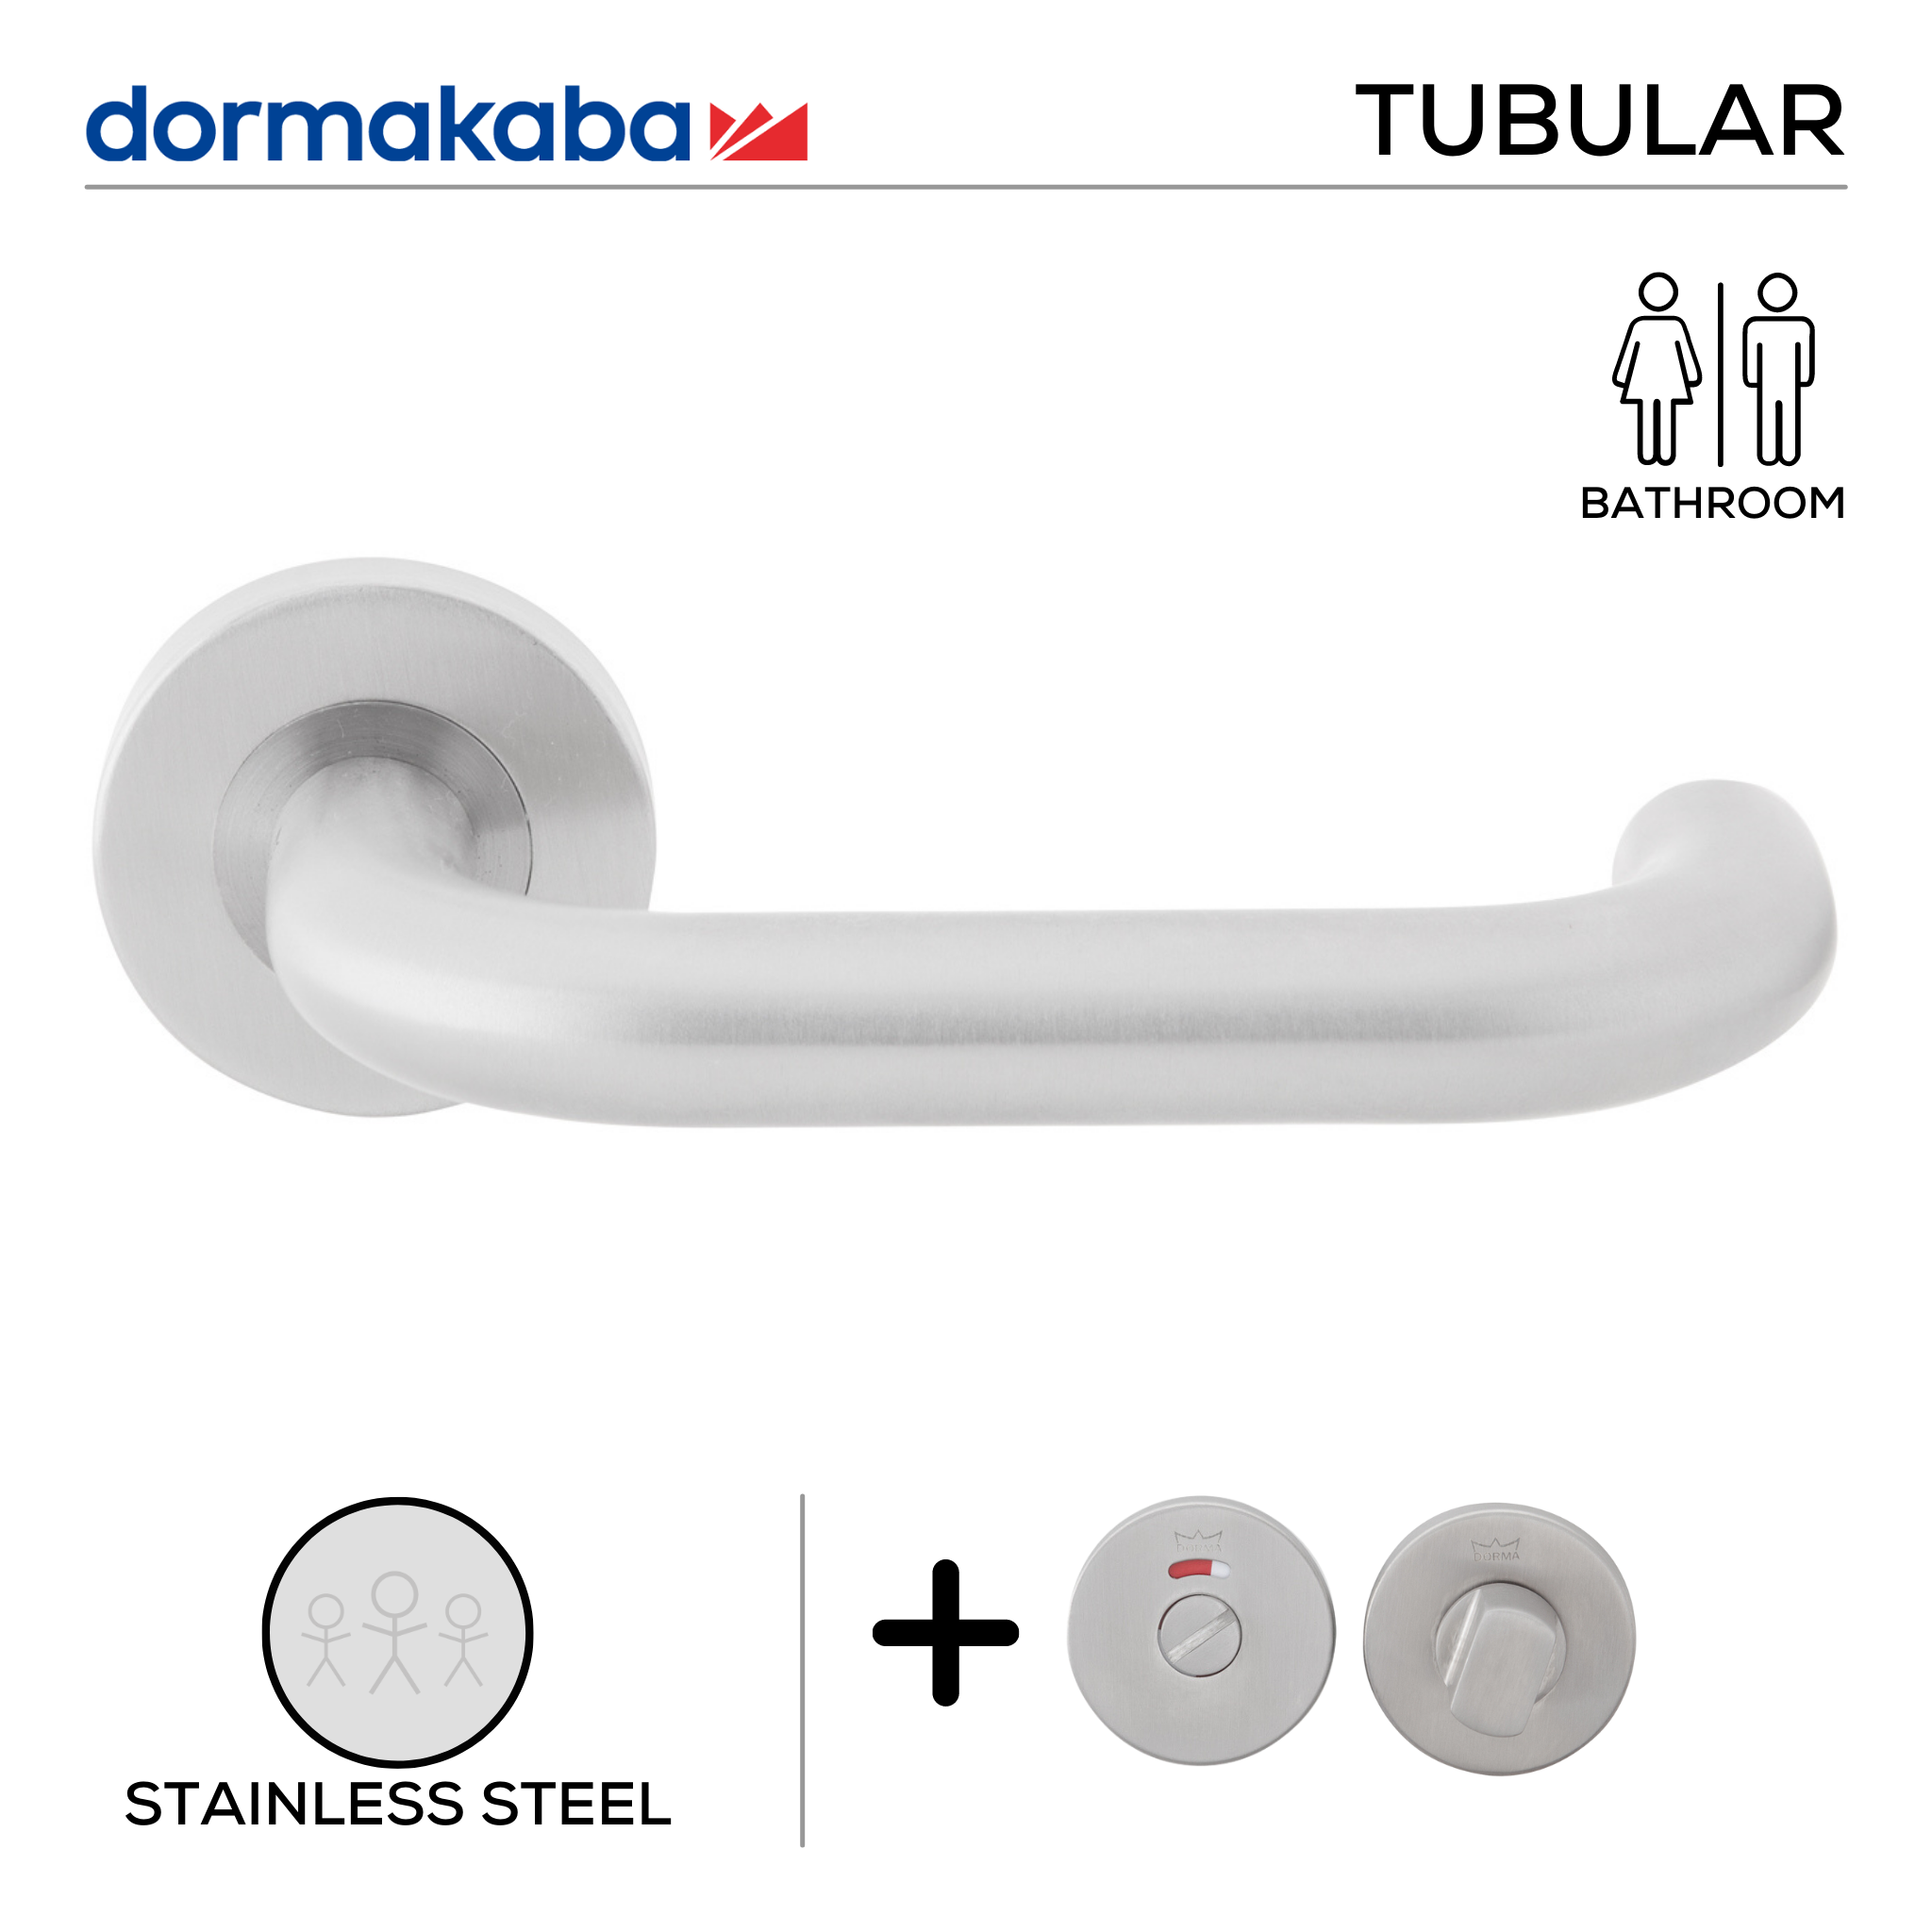 TH 120 Bathroom W/C, Lever Handles, Tubular, On Round Rose, With Bathroom (WC) Indicator Set - DWC 005, 155mm (l), Stainless Steel, DORMAKABA